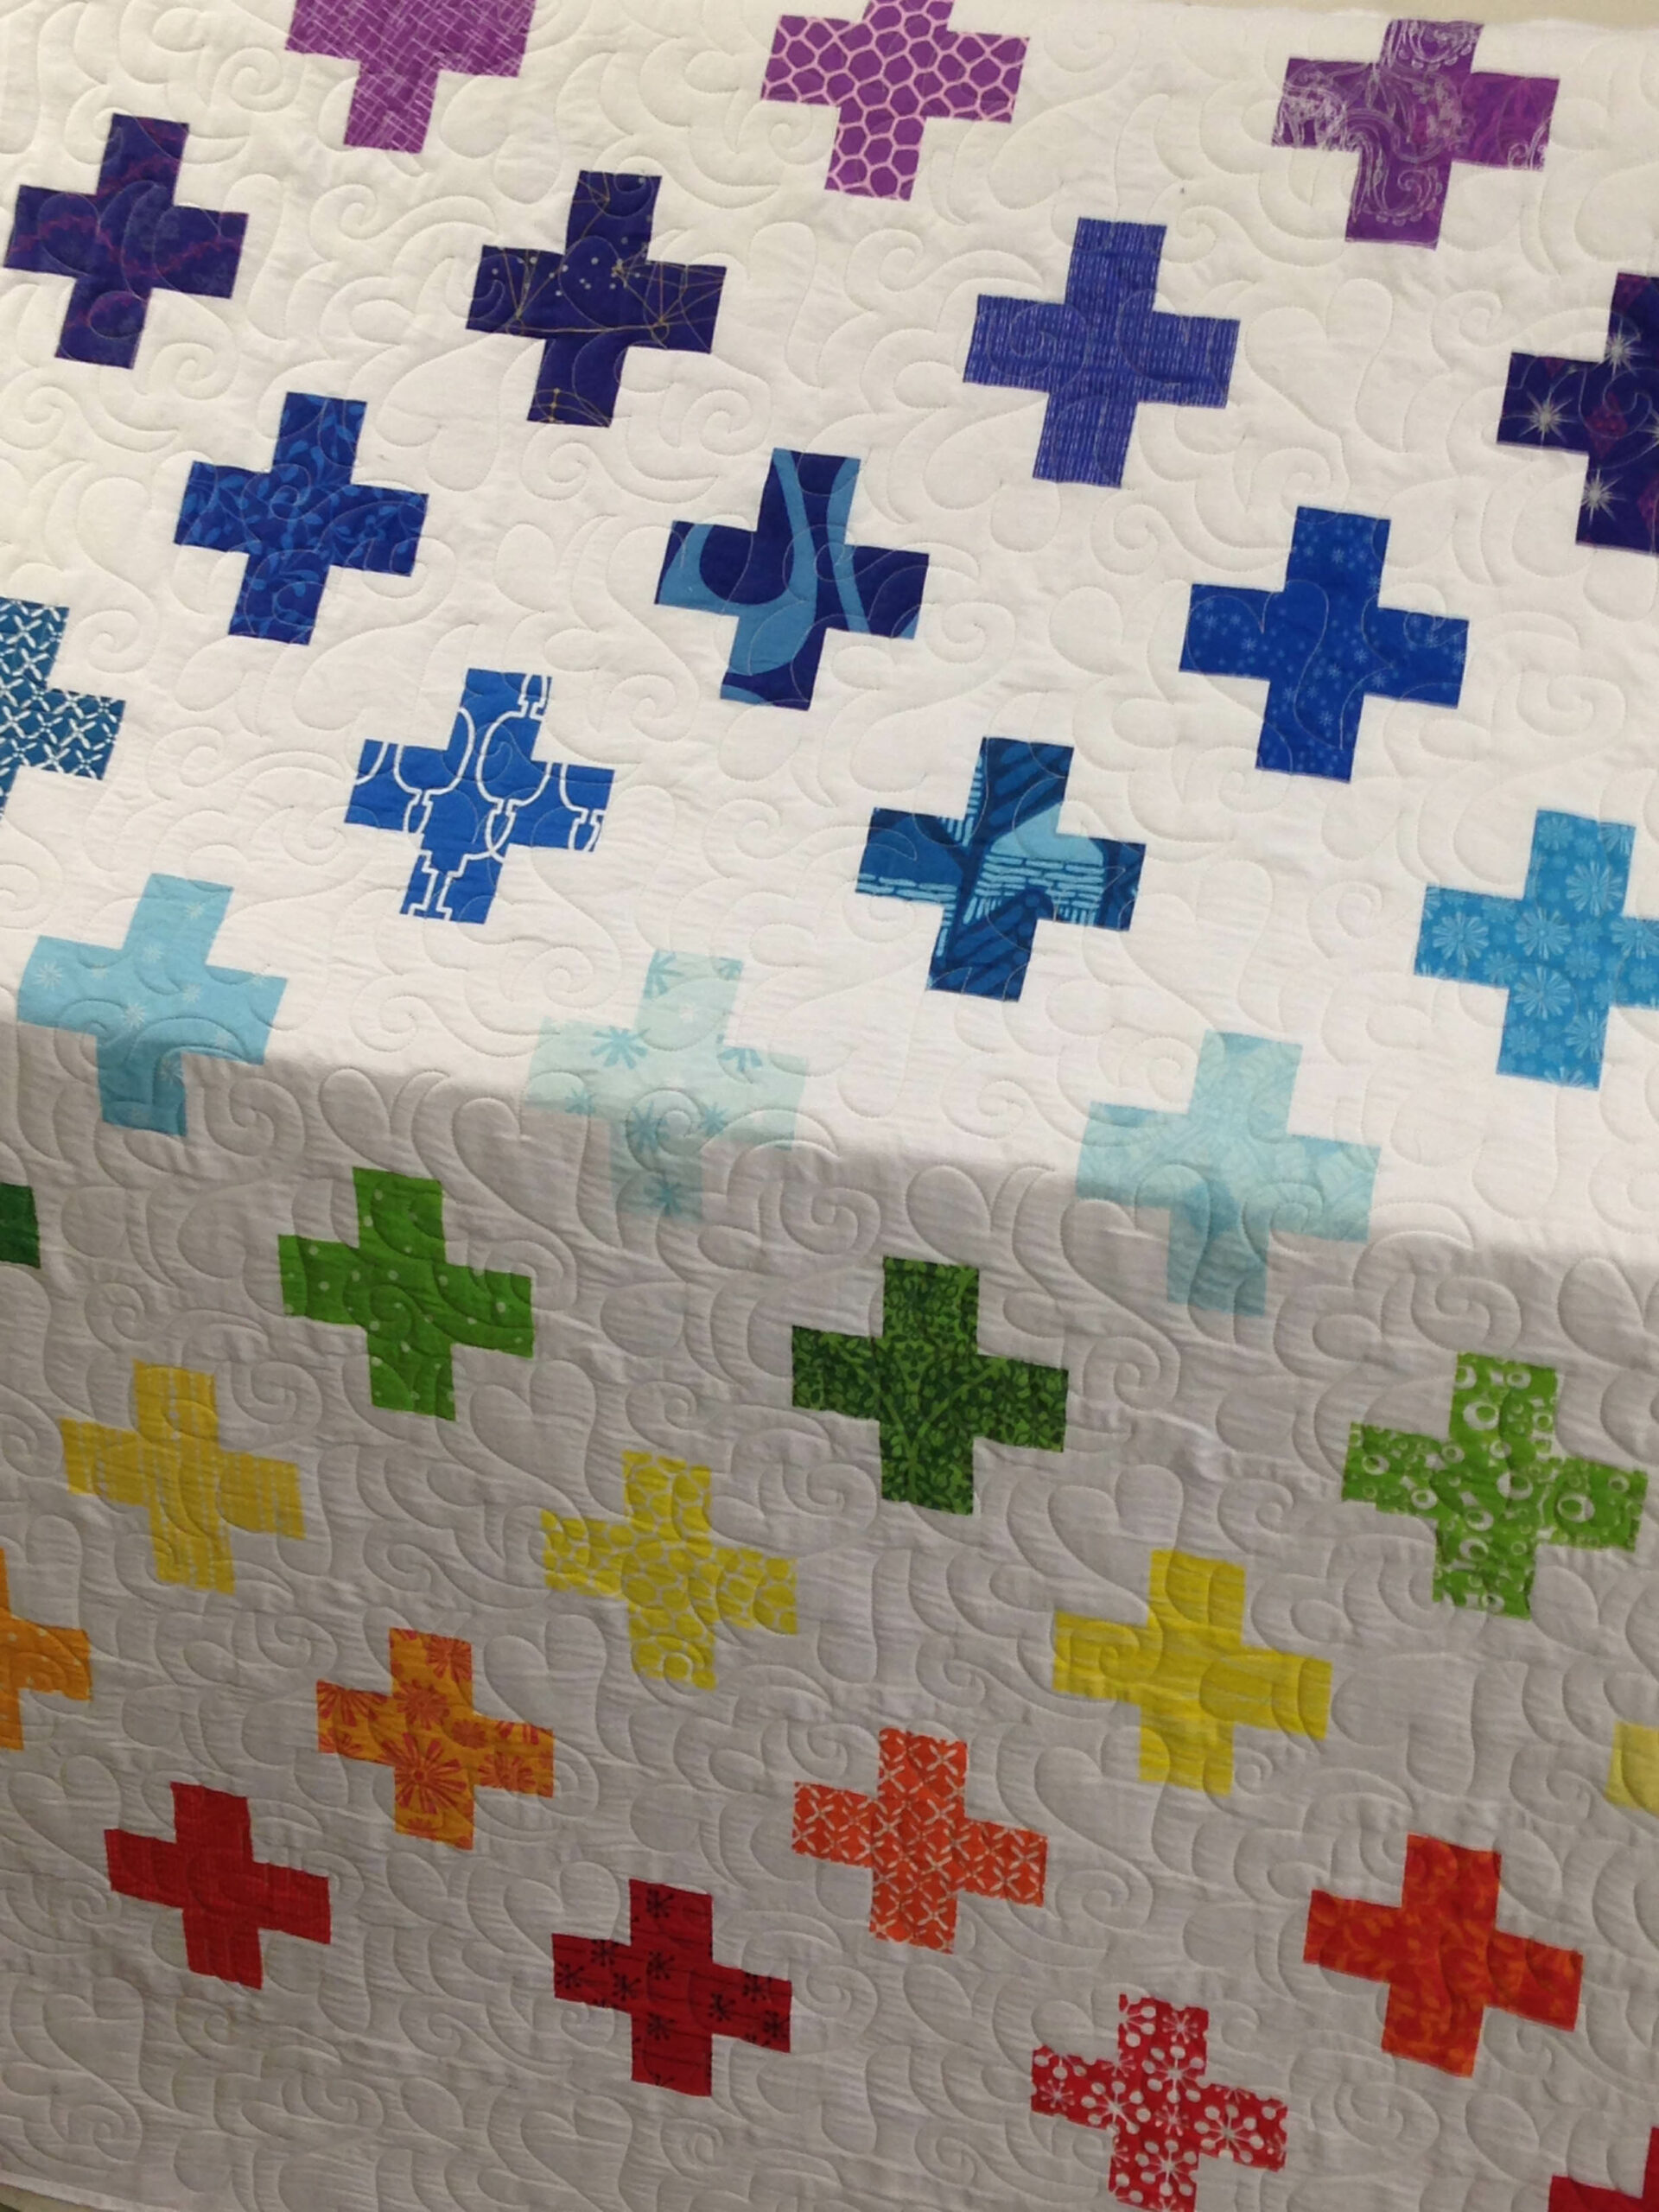 Featured image for “E2E Quilting”